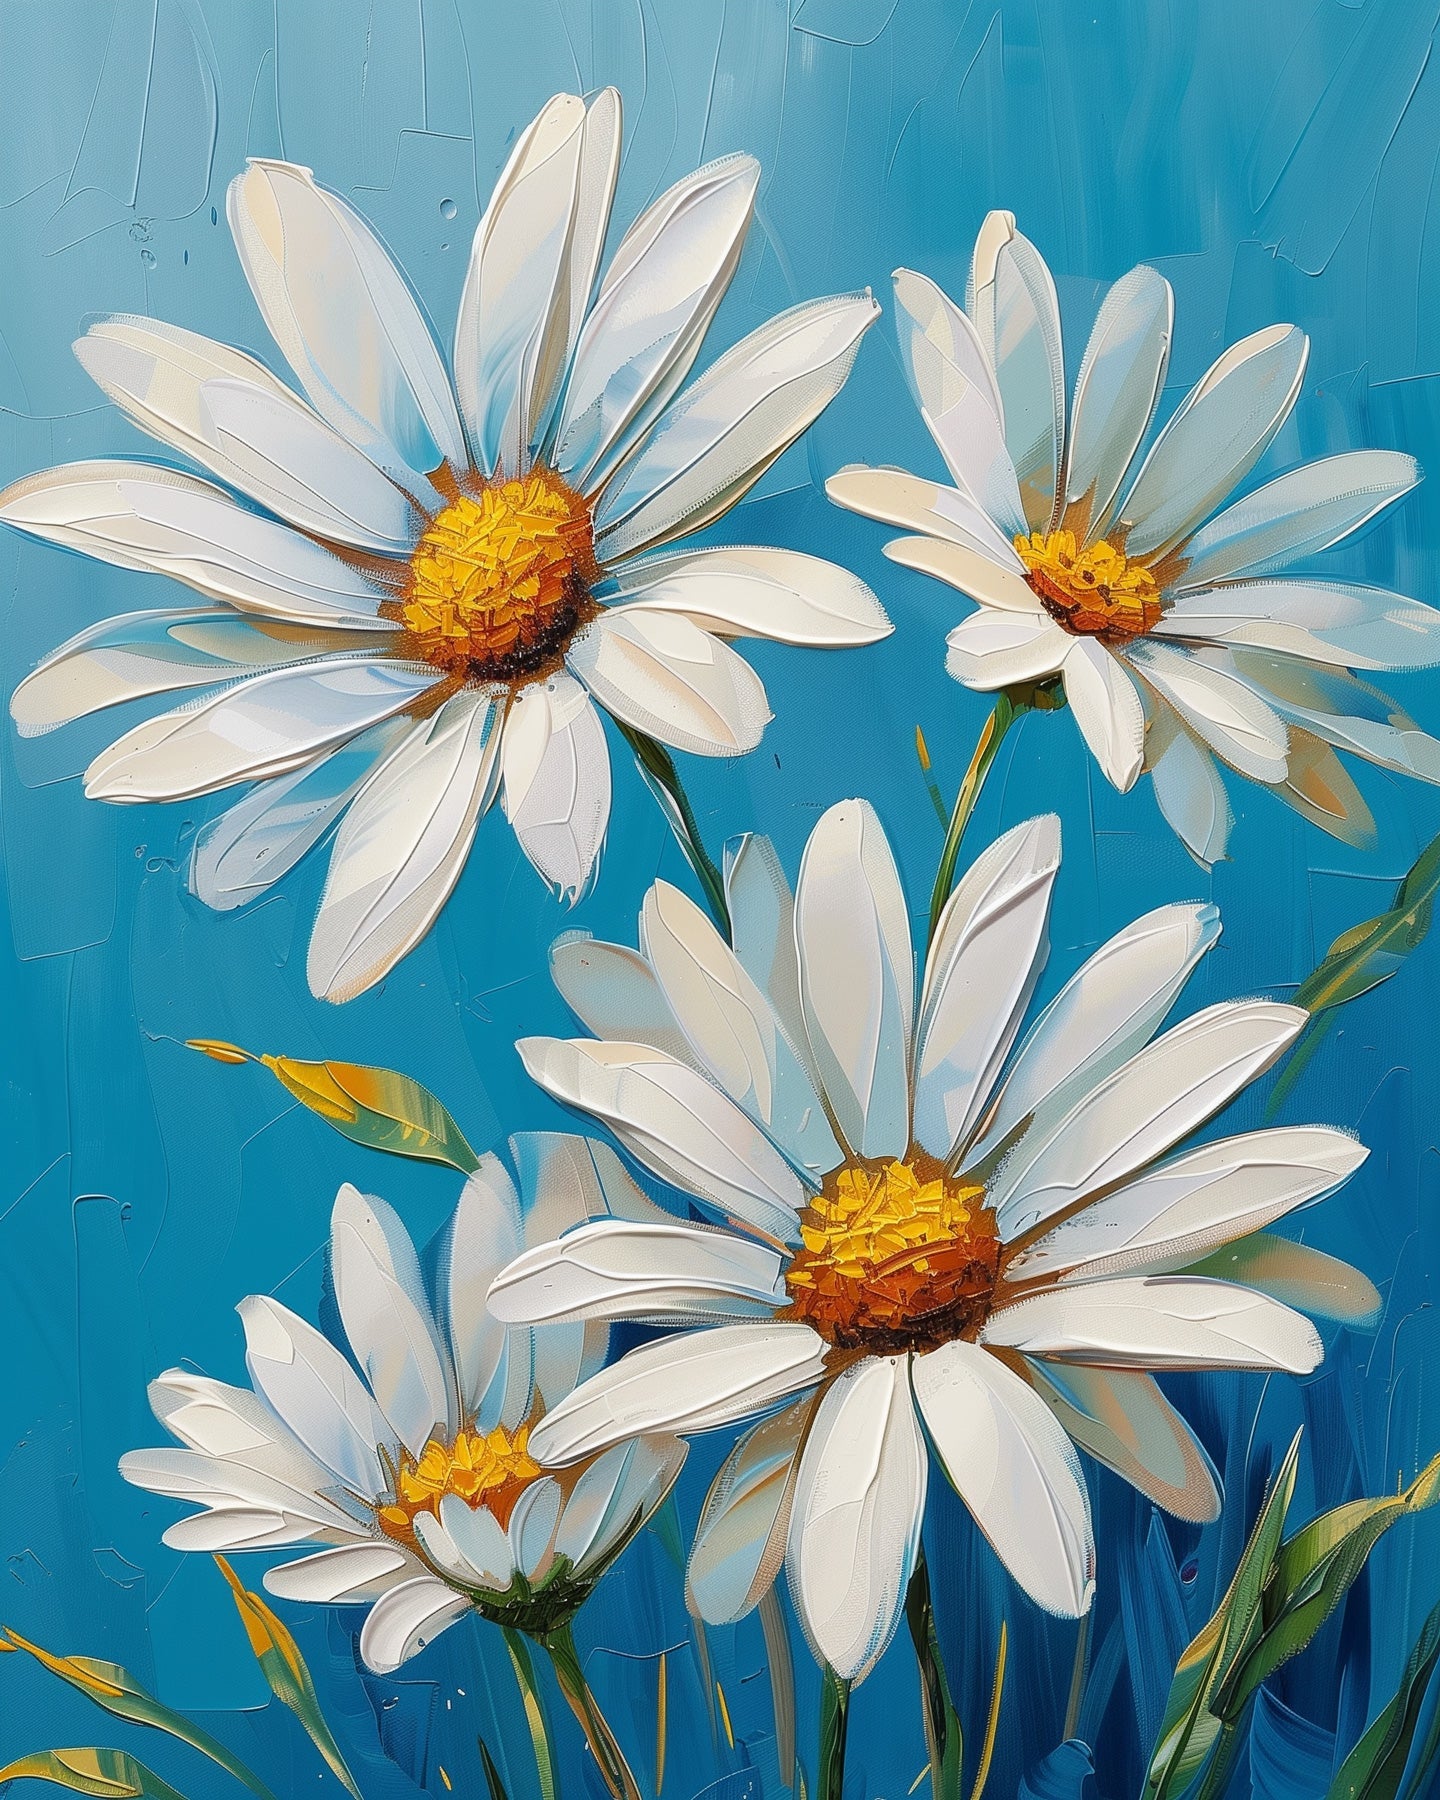 Field of Daisies - BestPaintByNumbers - Paint by Numbers Fixed Kit